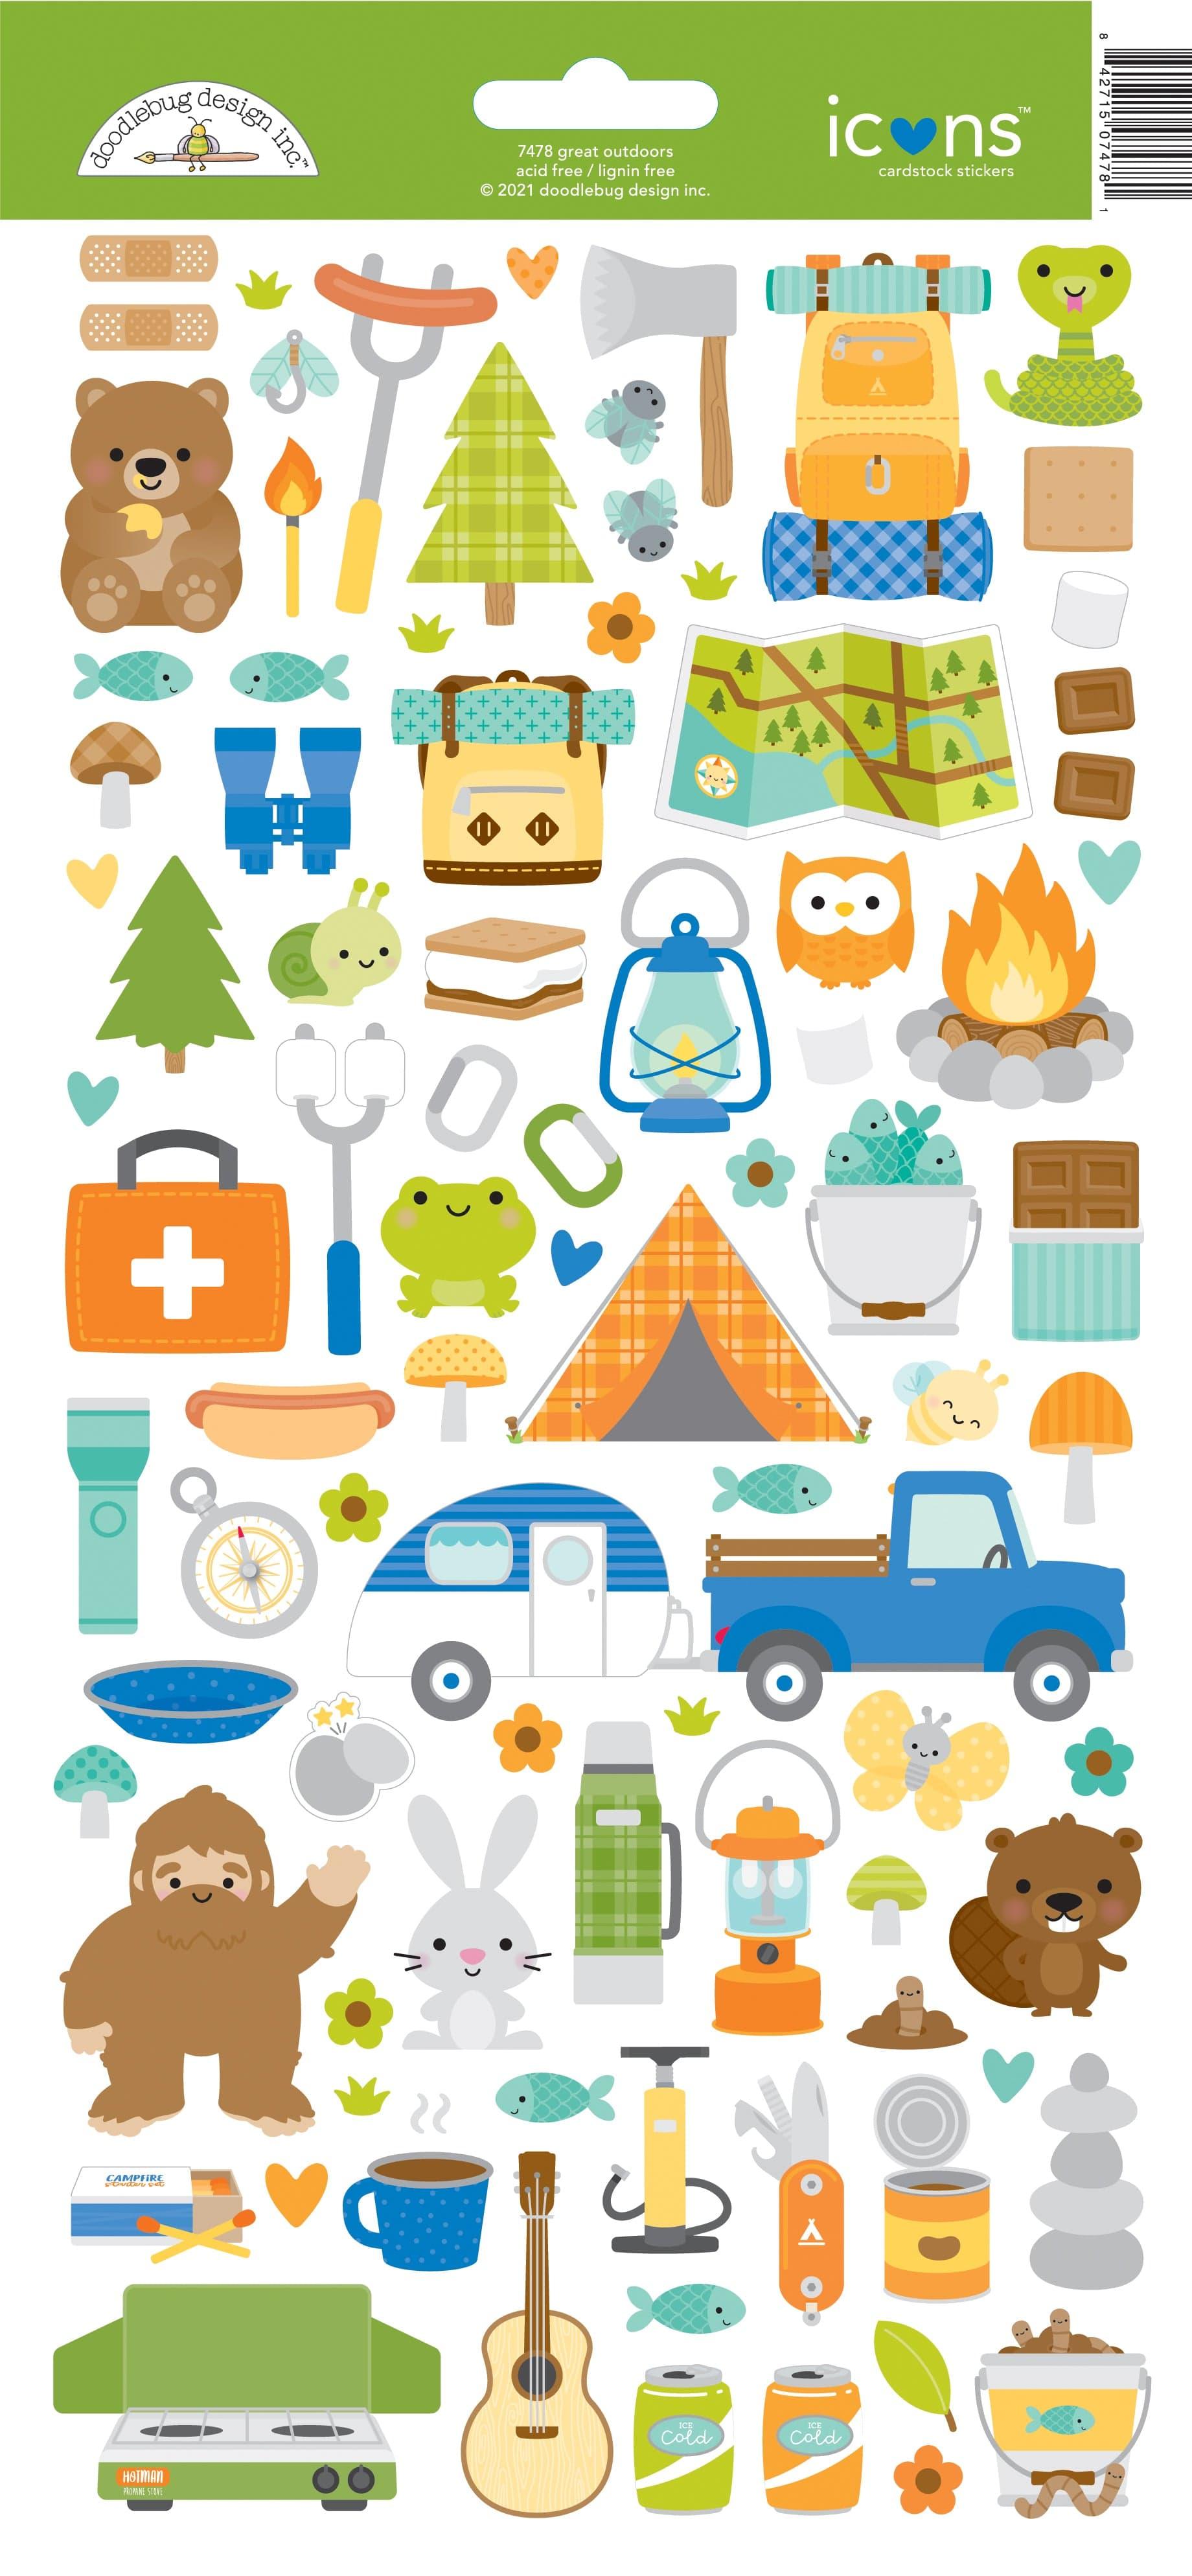 Great Outdoors Collection Icons 6 x 12 Cardstock Scrapbook Sticker Sheet by Doodlebug Design - Scrapbook Supply Companies